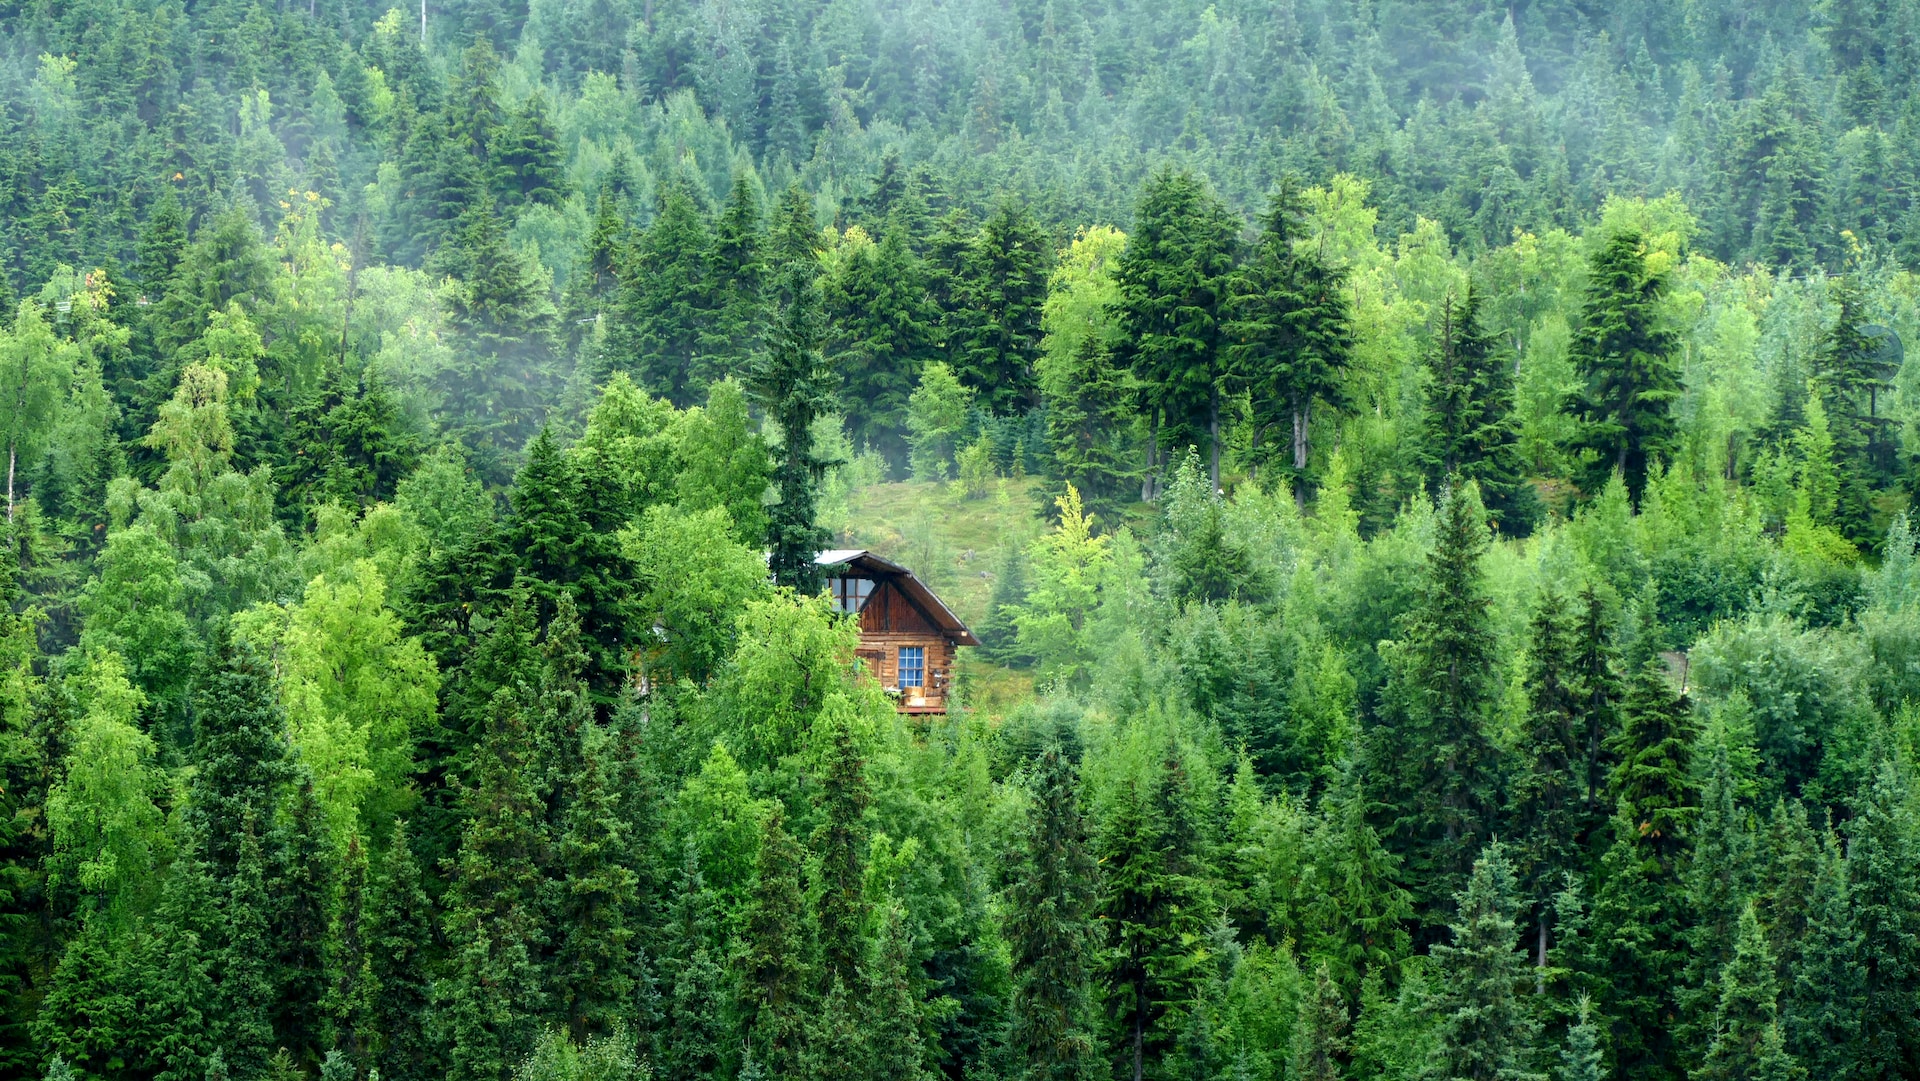 Brown wooden house on green forest during daytime when looking where is the cheapest place to build a house